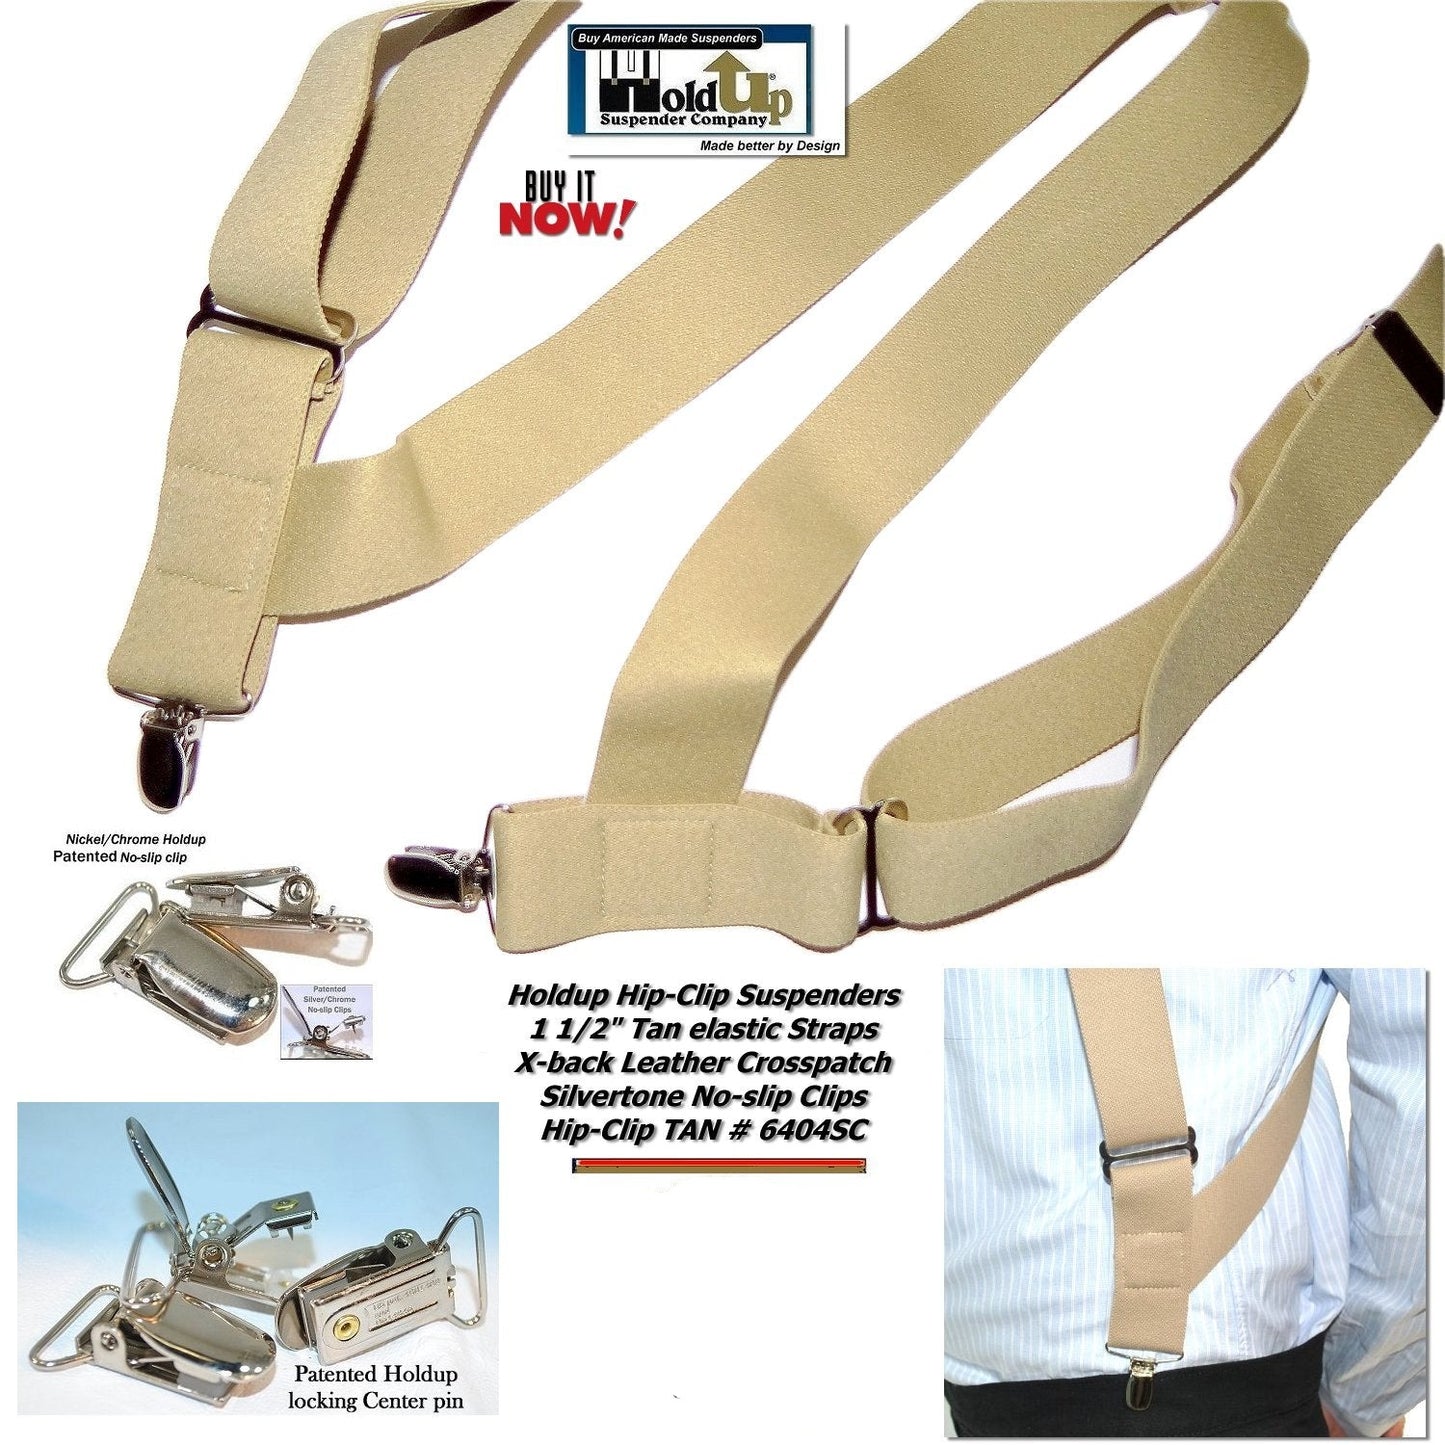 Hold-Ups Tan Trucker Style Hip-clip Series Suspenders in 1 1/2" Width and USA Patented No-slip Silver Clips